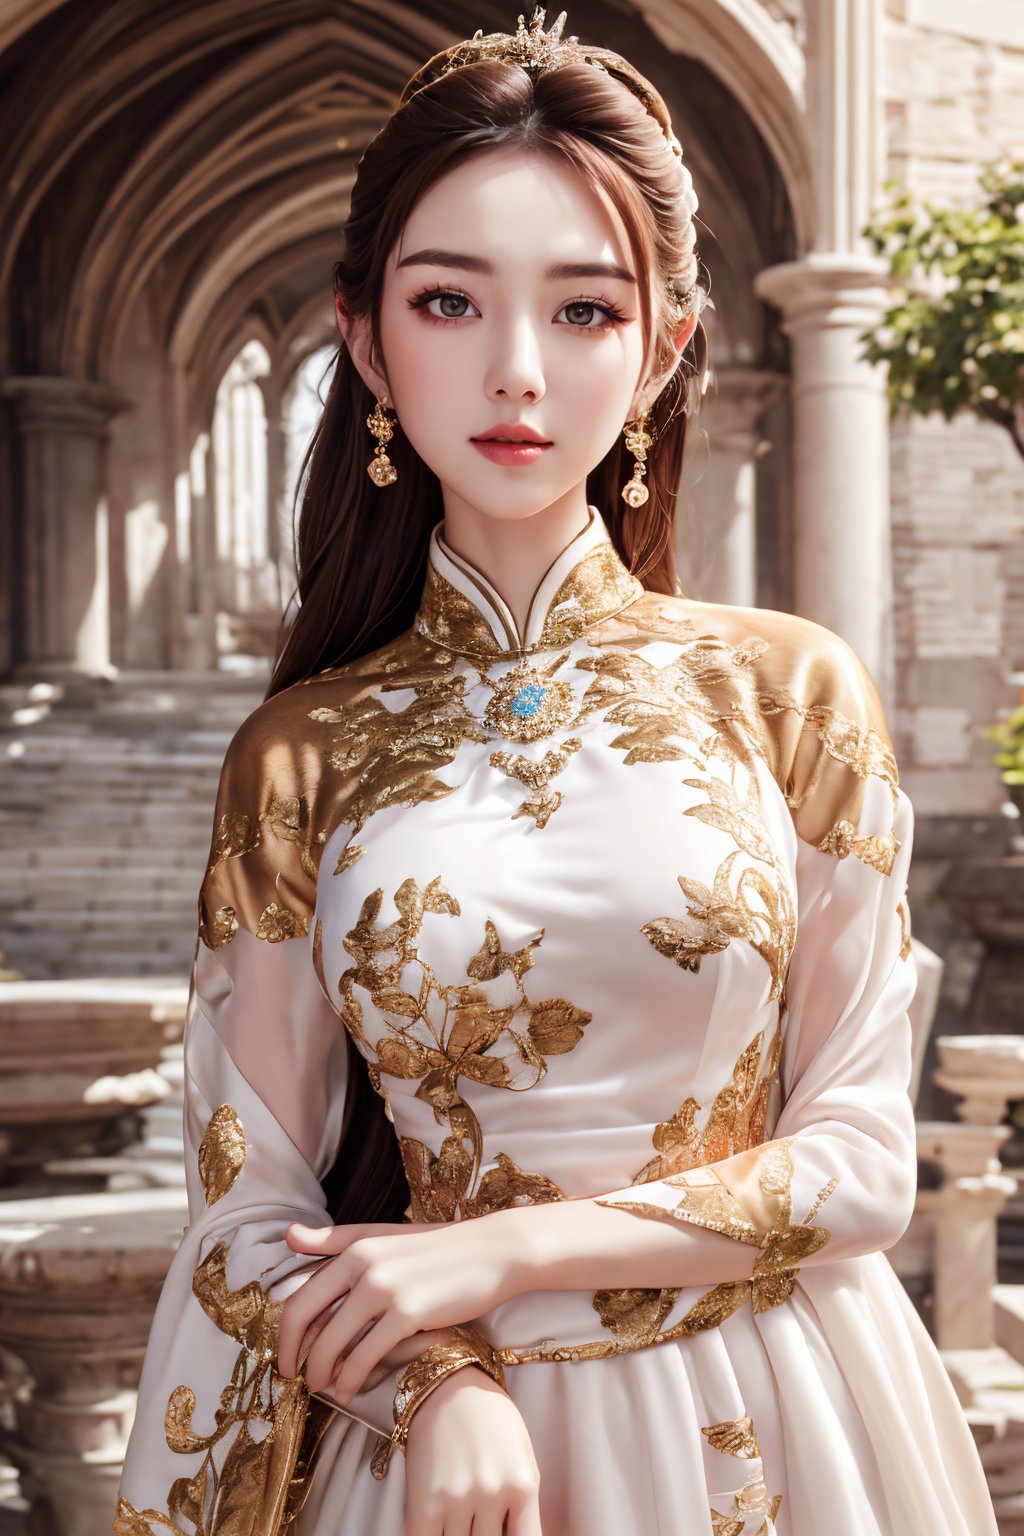 masterpiece,(best quality:1.4),full body realistic portrait, outdoor at a wonder of the world, ultra-detailed,1 girl,22yo,wear daily elegant outfit,,high resolution,genuine emotion,wonder beauty ,Enhance, bright colors.